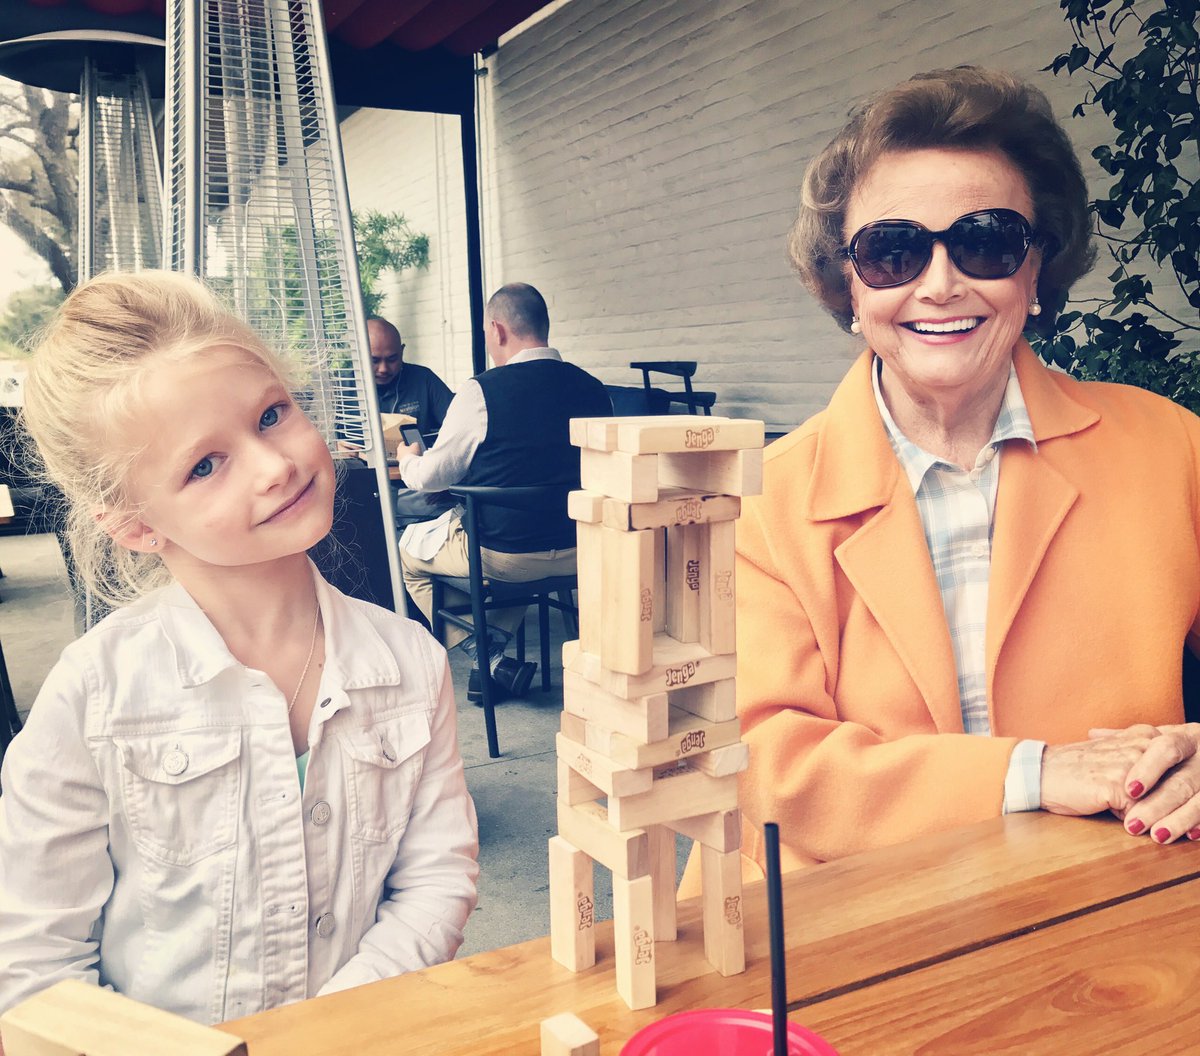 Maxwell and her Great Grandmother, Nana Mary Maxwell, enjoying the early bird special #jengaqueens #familyis❤️ https://t.co/KIN47QKlxO